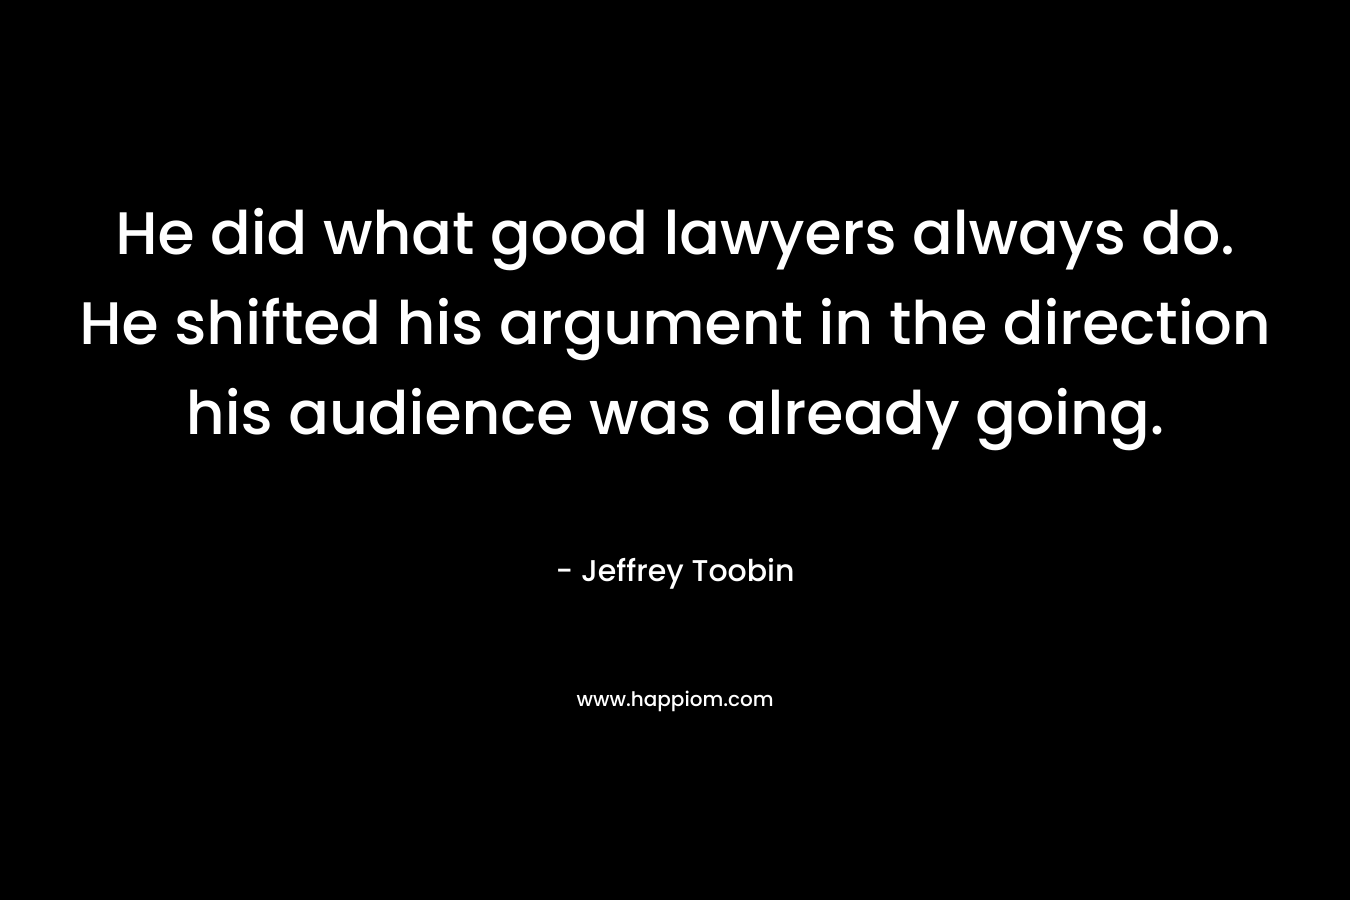 He did what good lawyers always do. He shifted his argument in the direction his audience was already going.